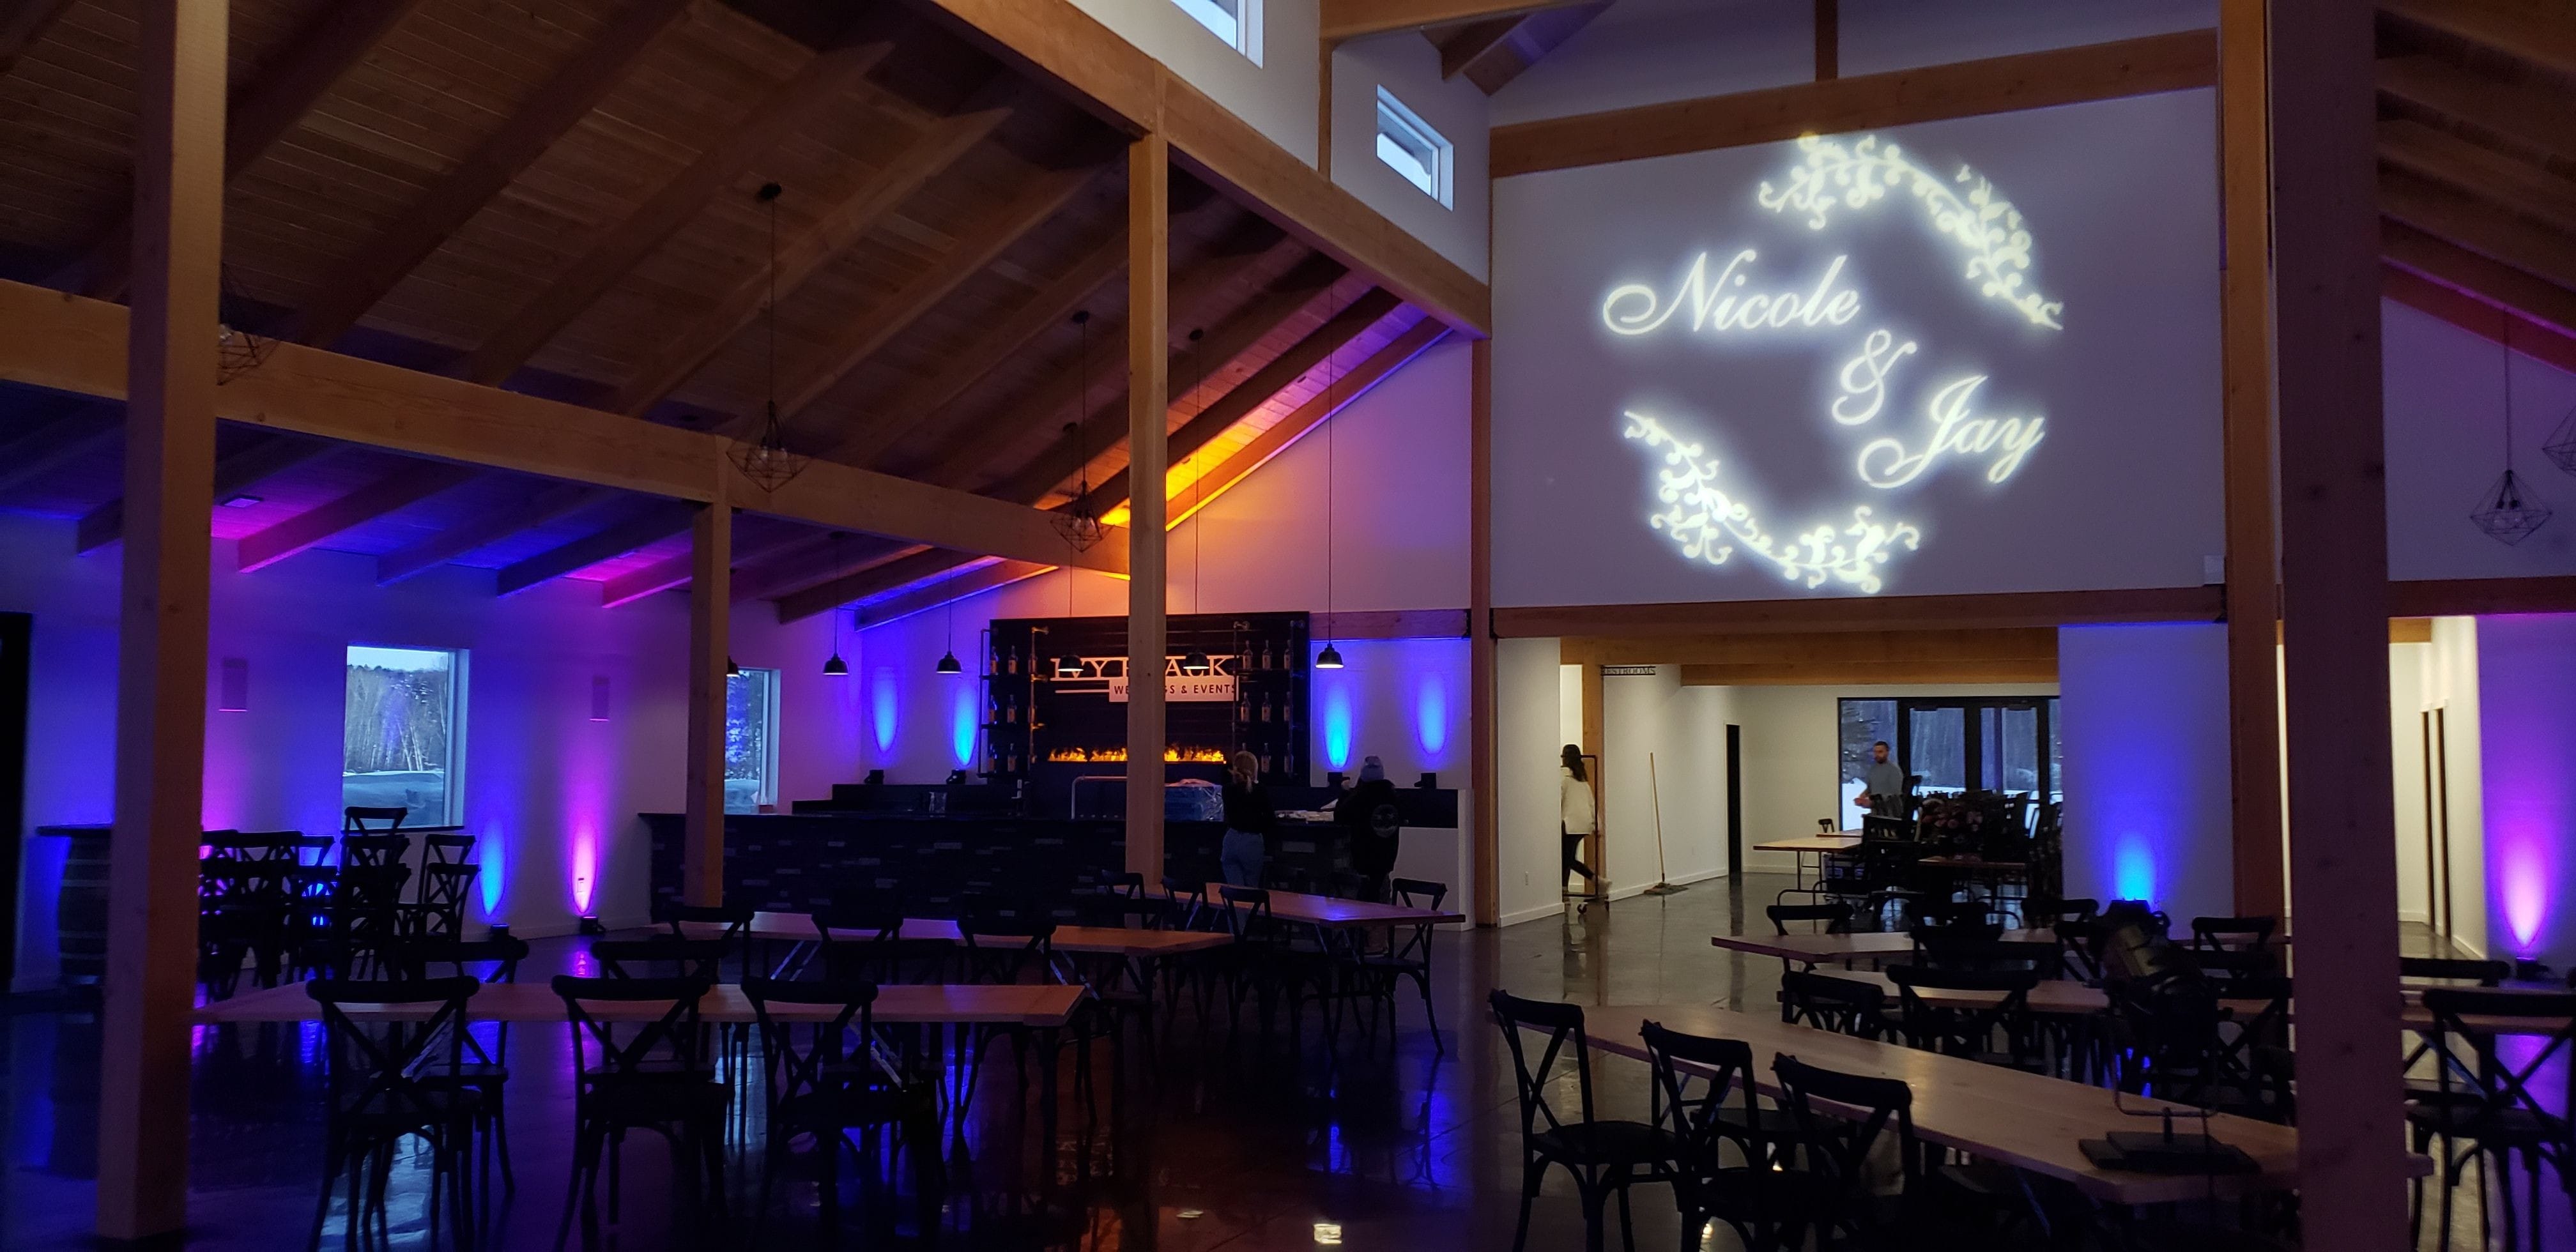 Ivy Black wedding lighting with blue and purple up lighting and a wedding monogram by Duluth Event Lighting